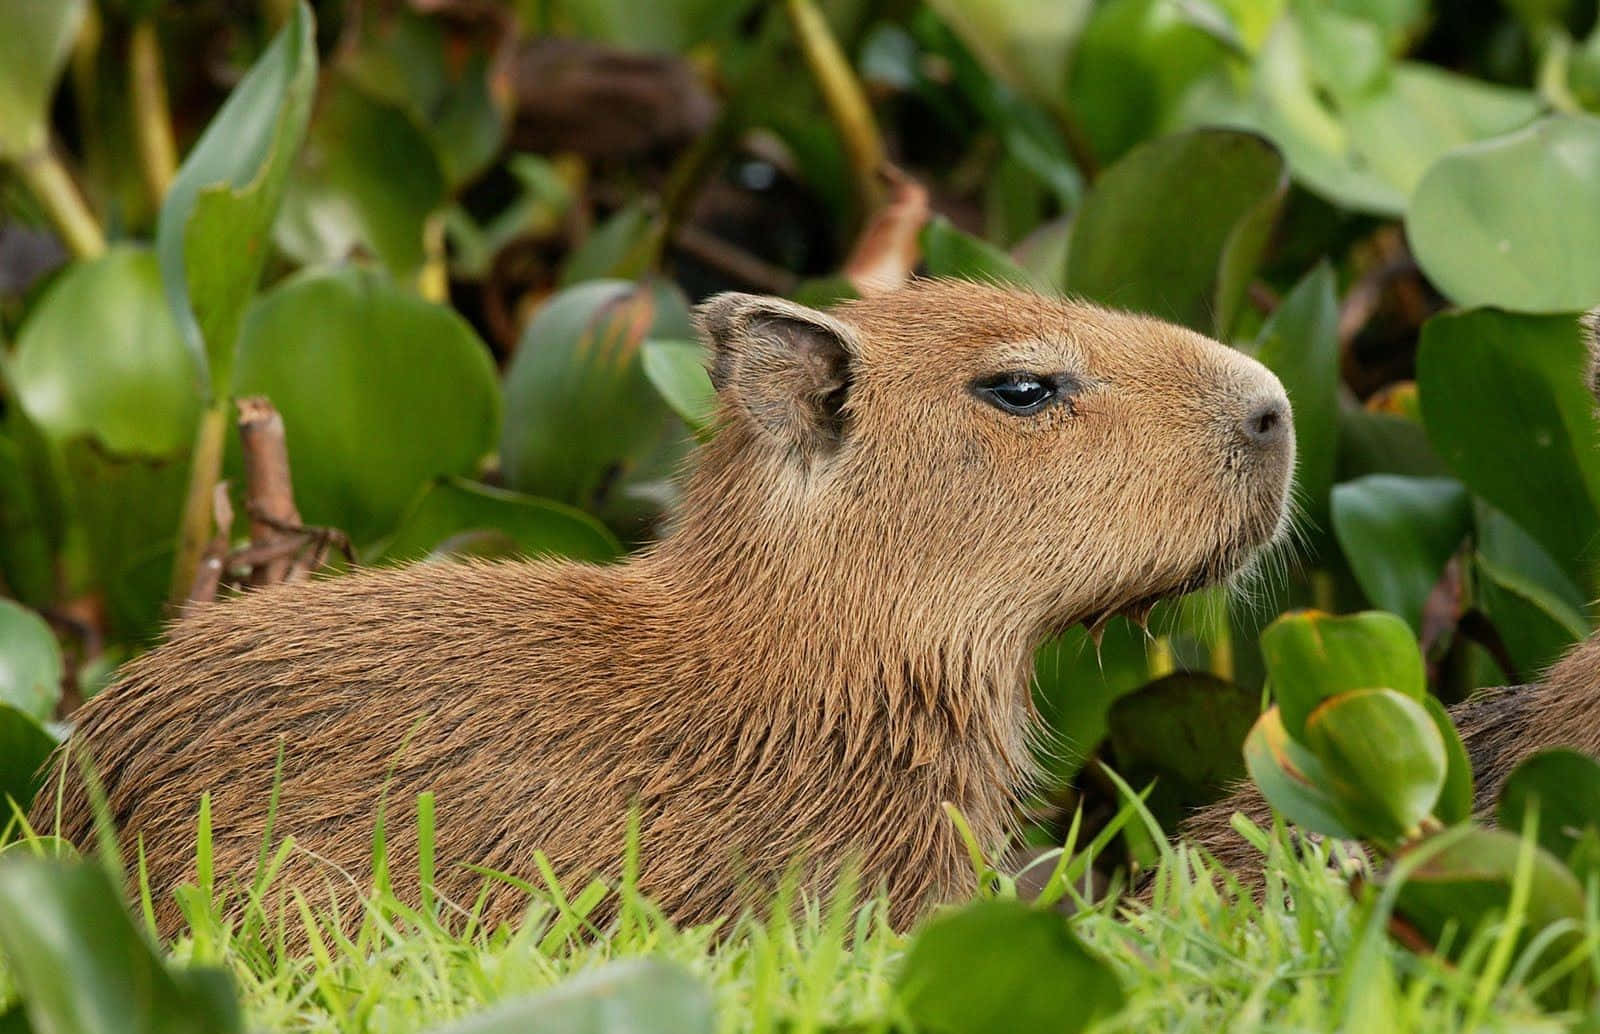 Two Baby Capybaras Are Sitting In The Grass